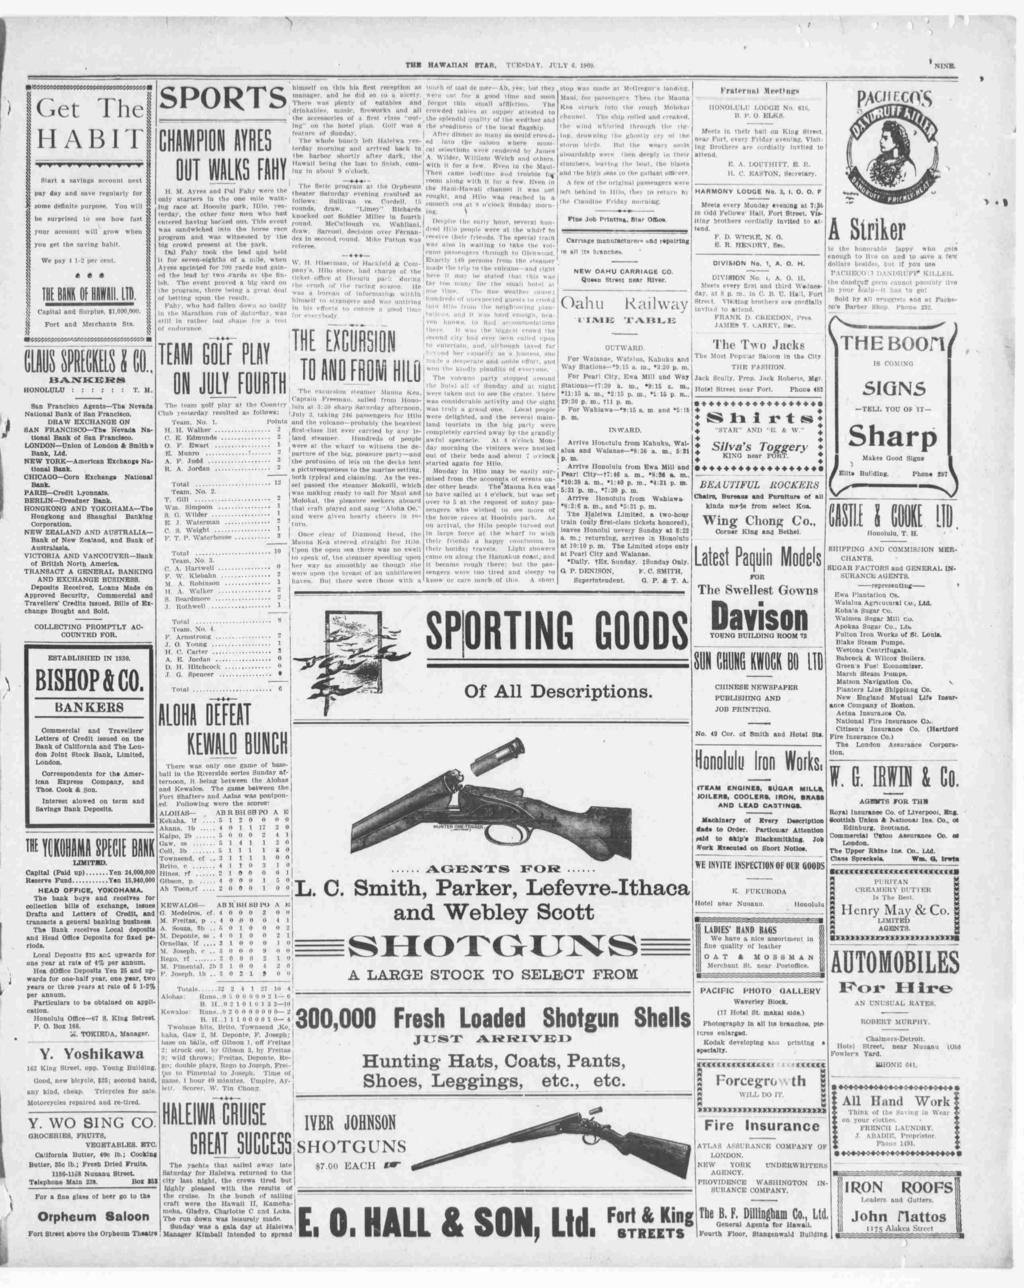 t THE HAWAAN STAR, TUESDAY, JULY C, 1900. NNE. C Get The HABT TVTTTTTTTVT Start a savngs account next pay day and save regularly for some defnte purpose.